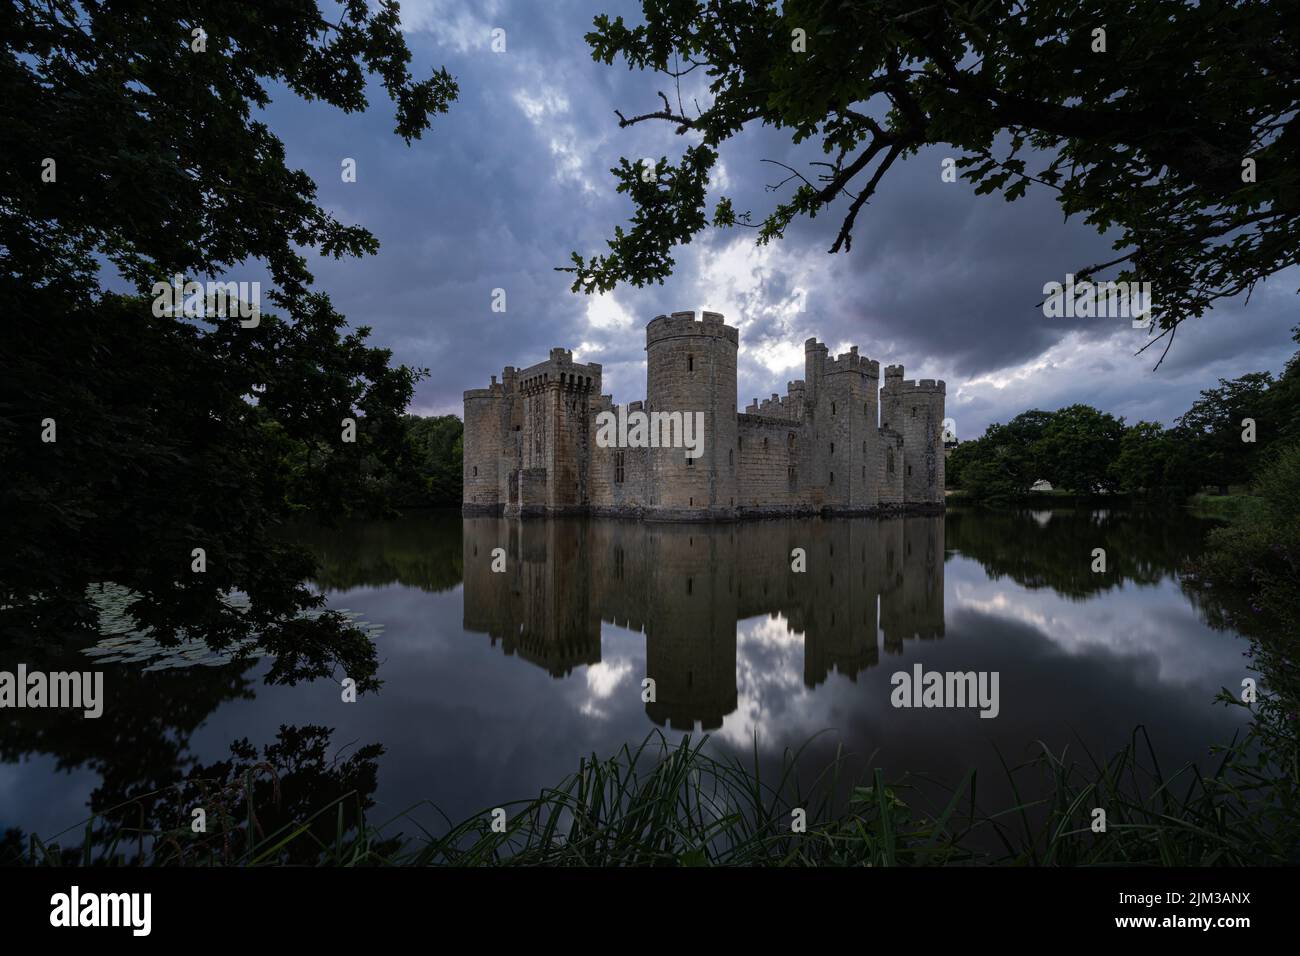 Bodiam Castle in East Sussex at sunset with the castle reflected in the surrounding moat and framed by trees Stock Photo